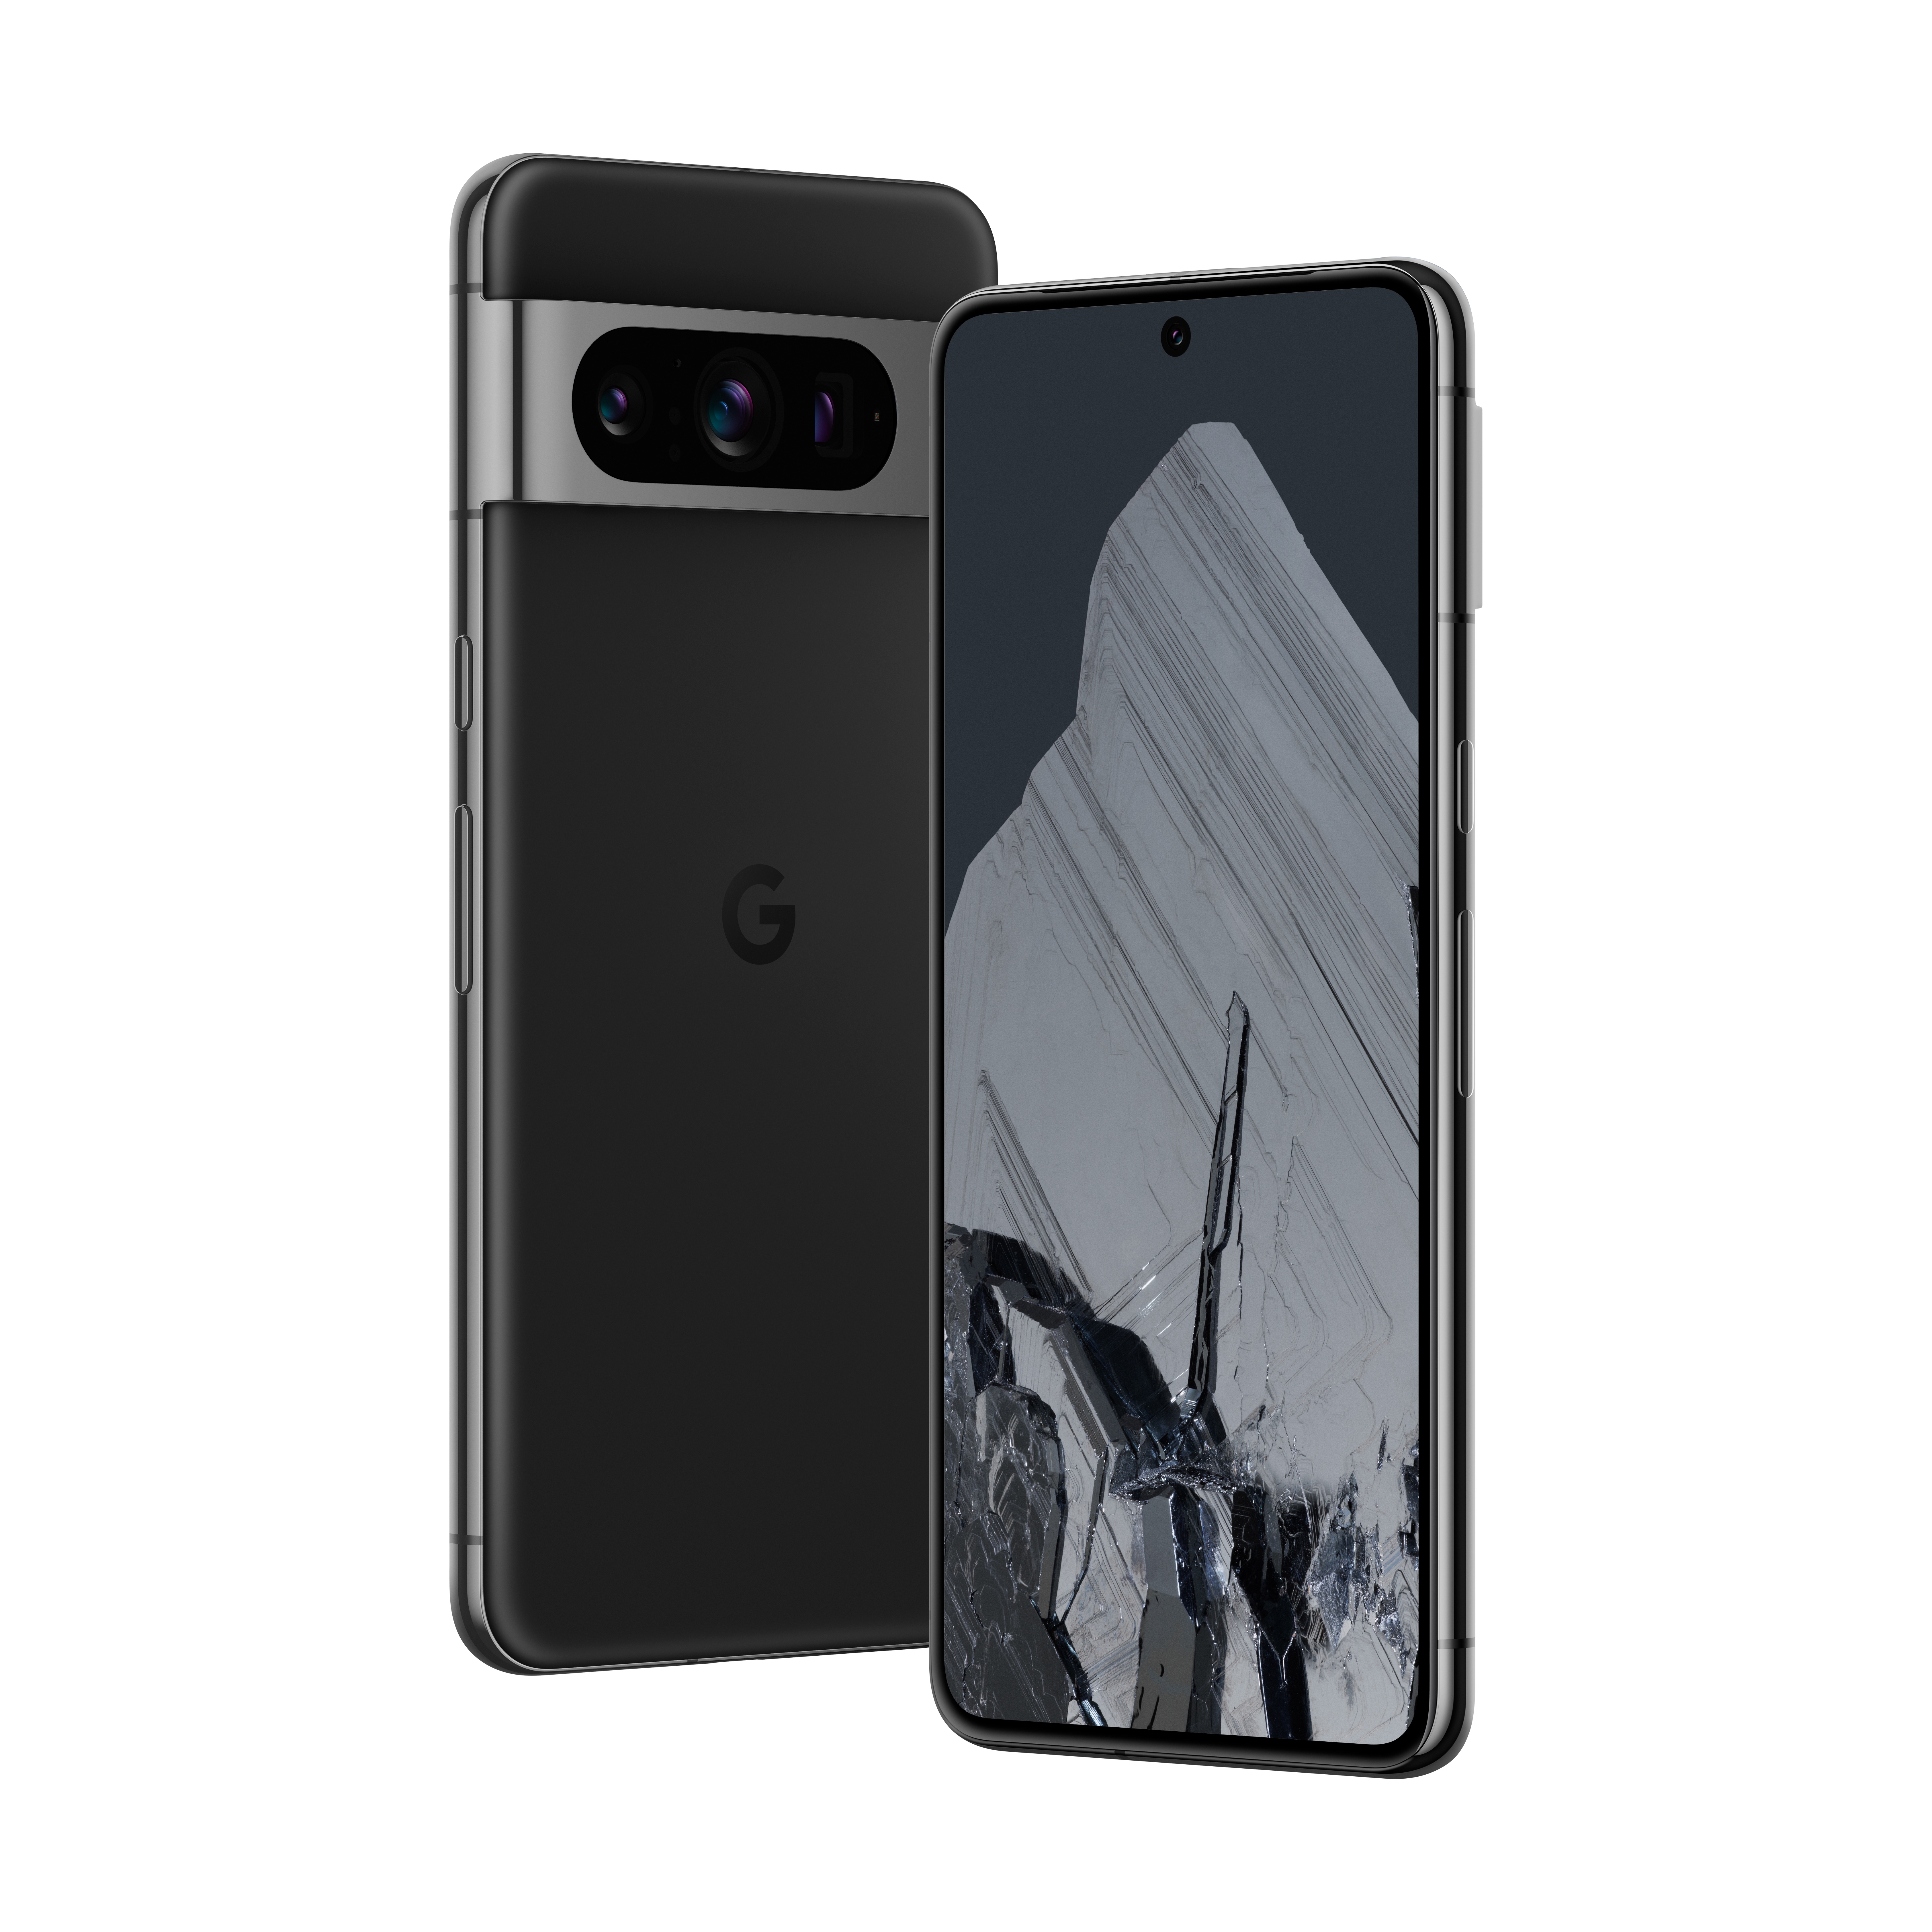 Pixel 8 Pro in Obsidian front and back square render